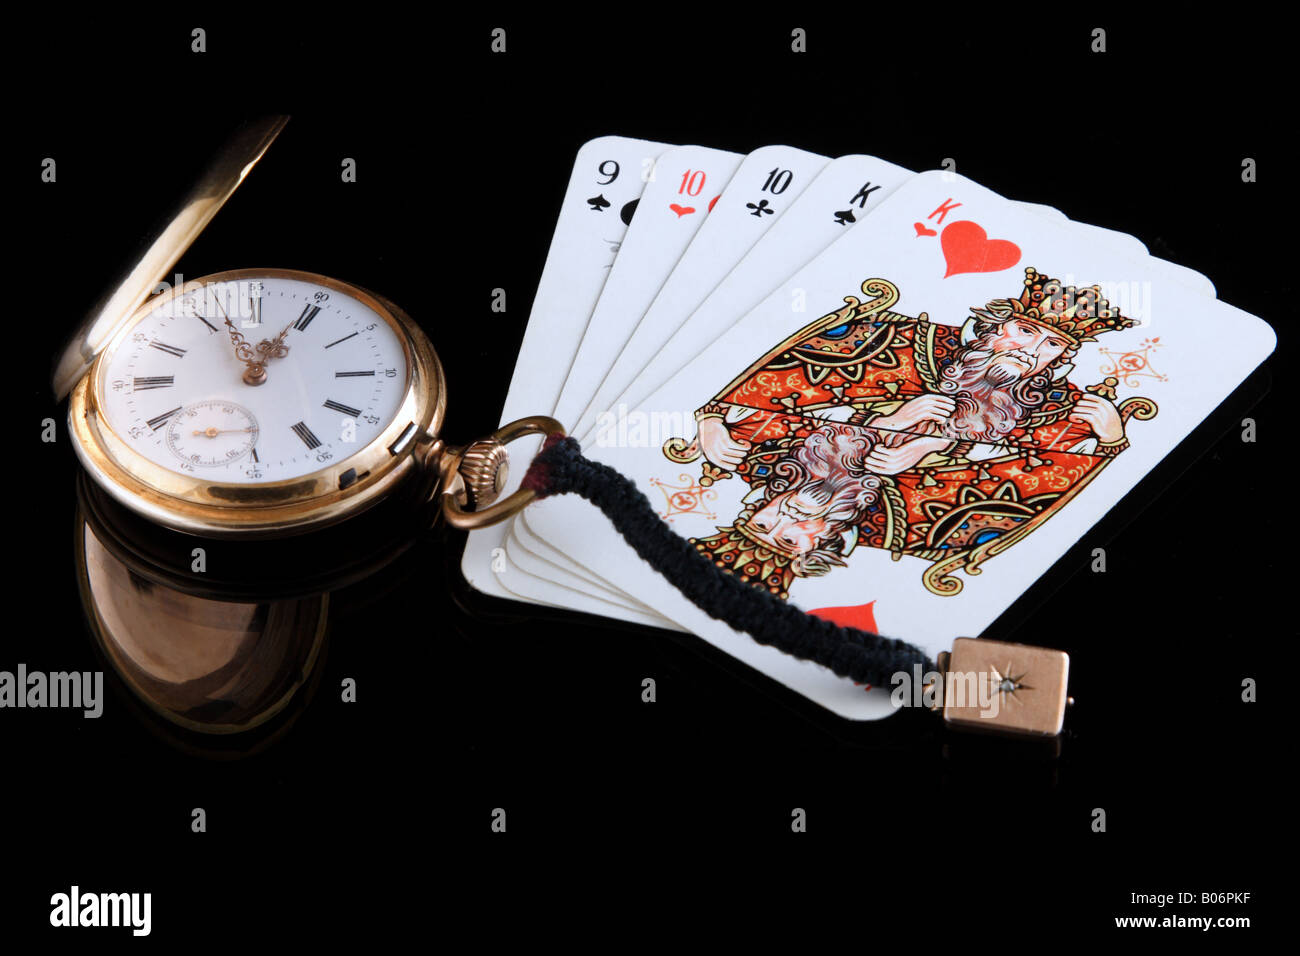 golden watch and playing cards on black background Stock Photo